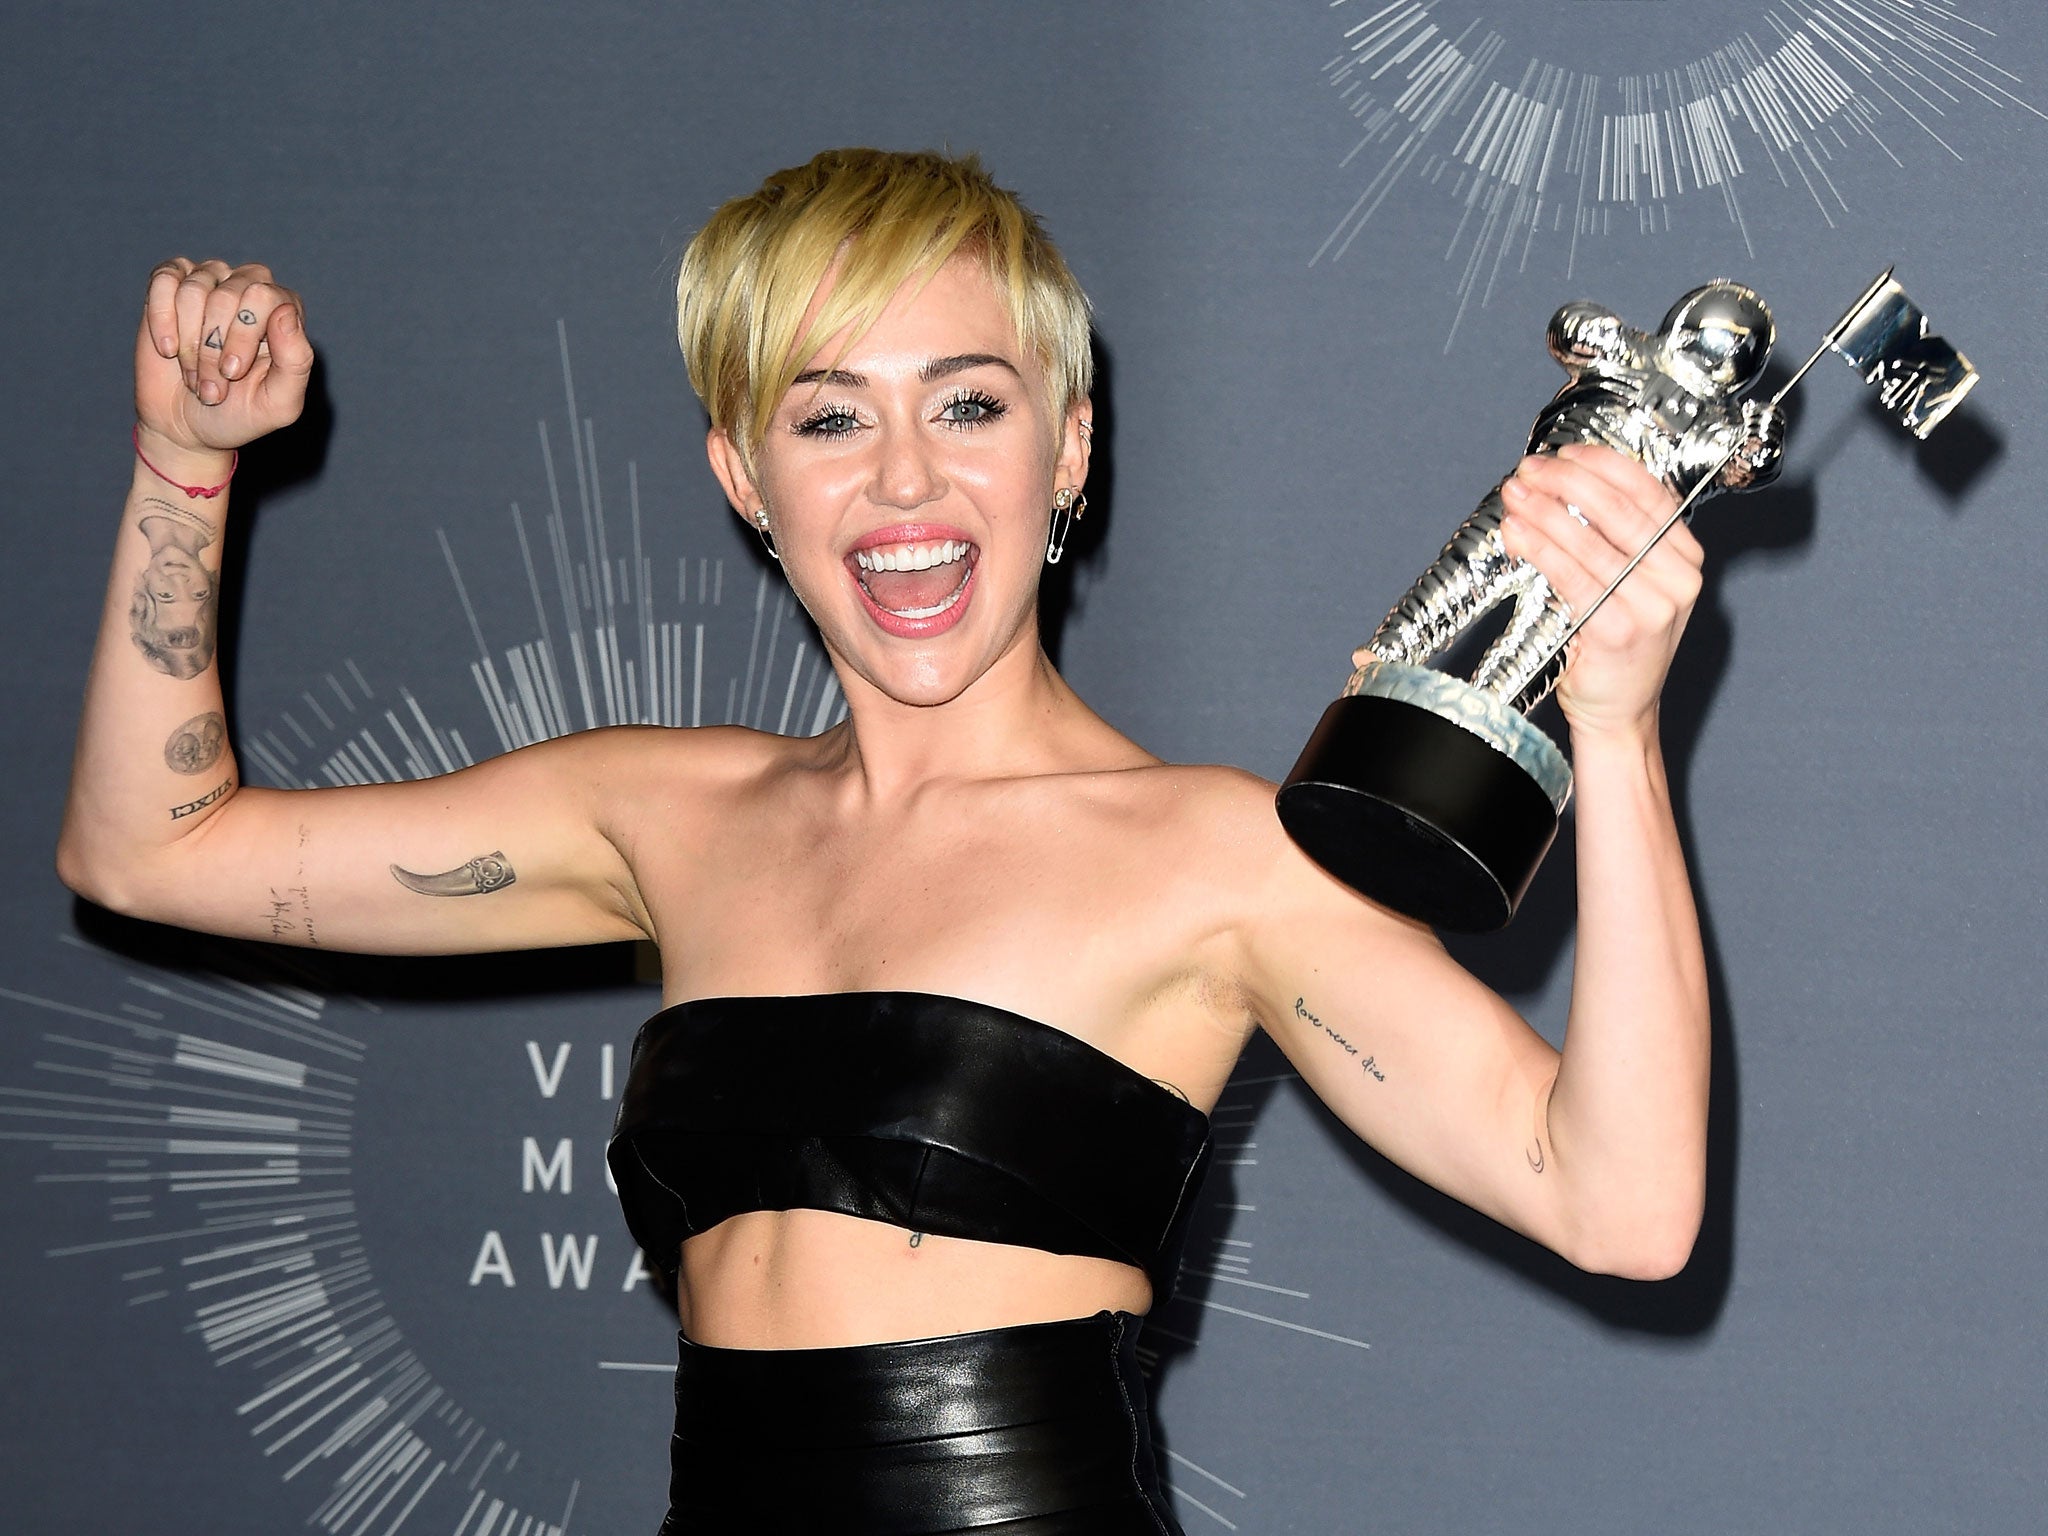 MTV VMAs 2014 Miley Cyrus has homeless man accept Video of the Year award for her The Independent The Independent photo